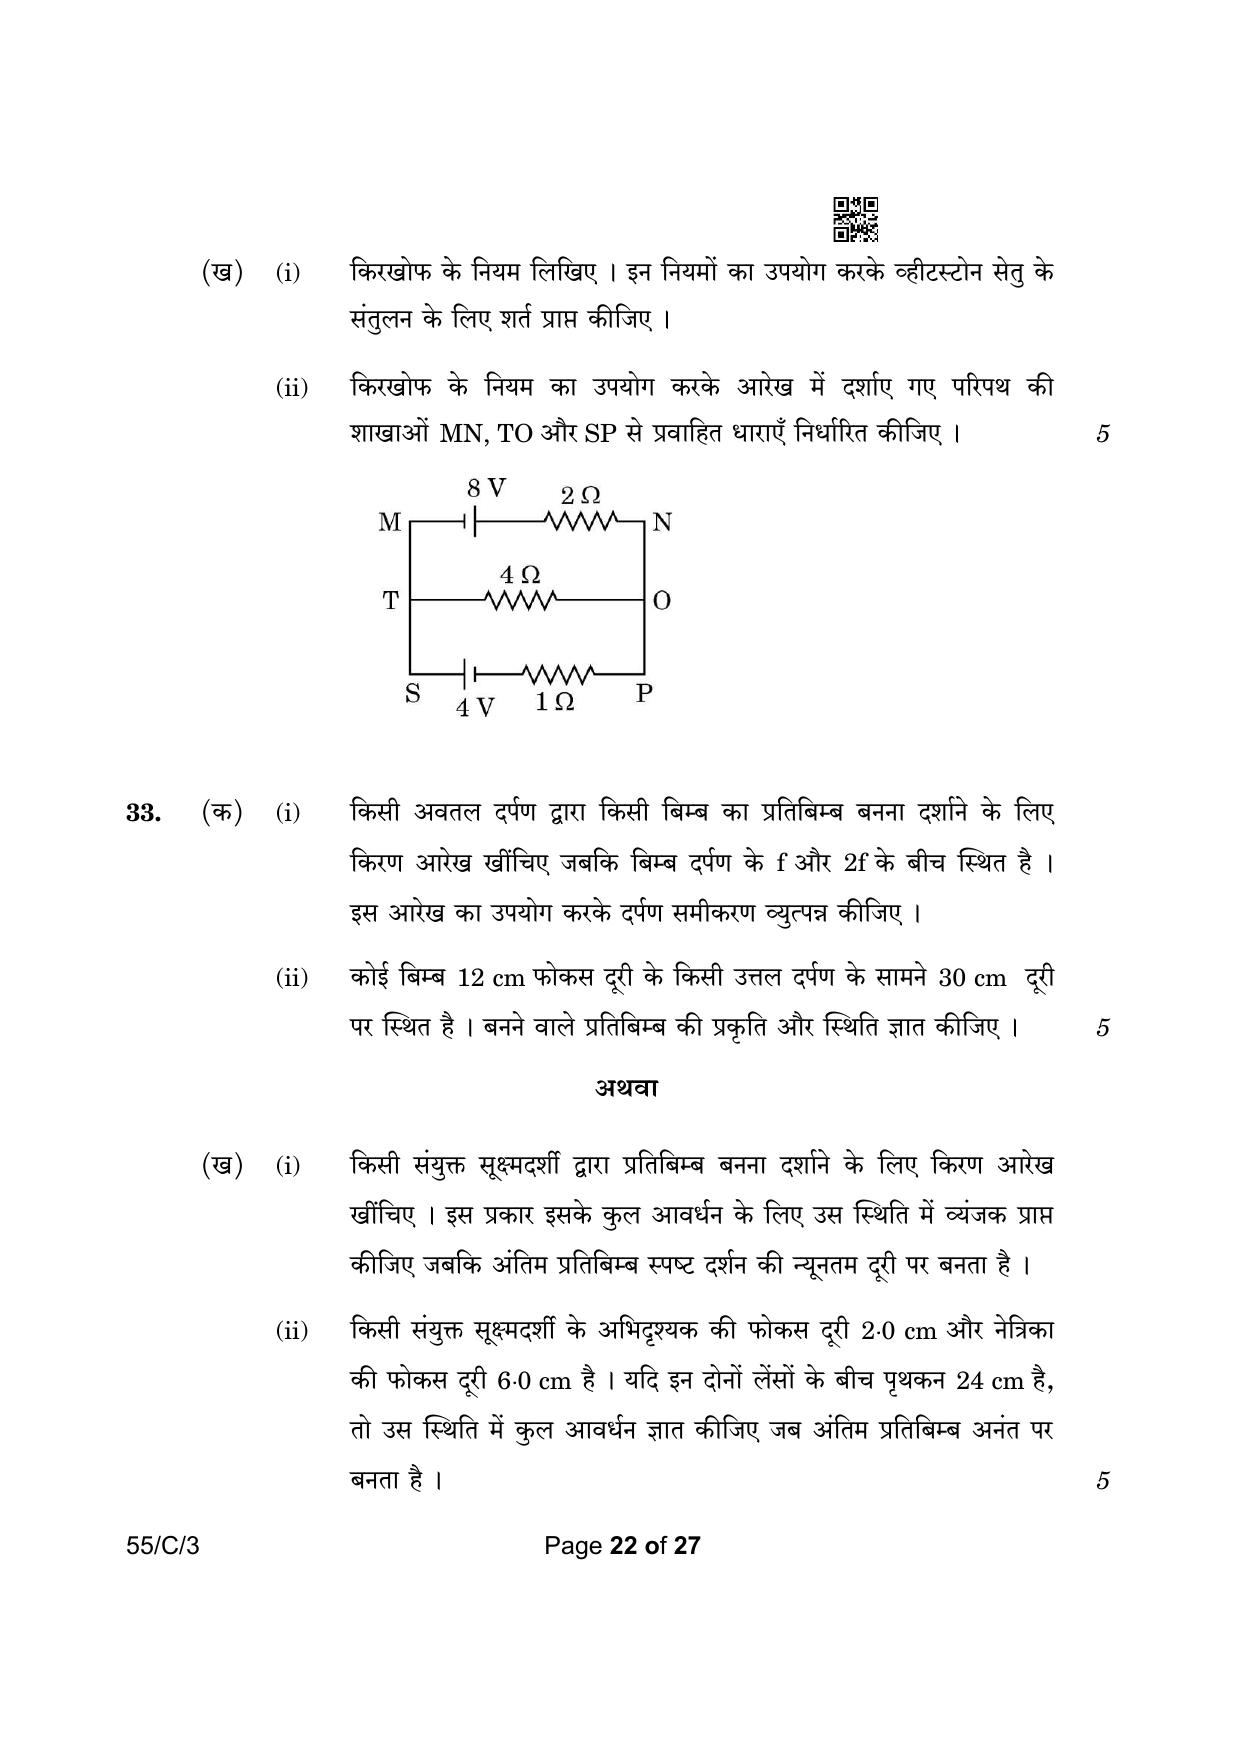 CBSE Class 12 55-3 Physics 2023 (Compartment) Question Paper - Page 22